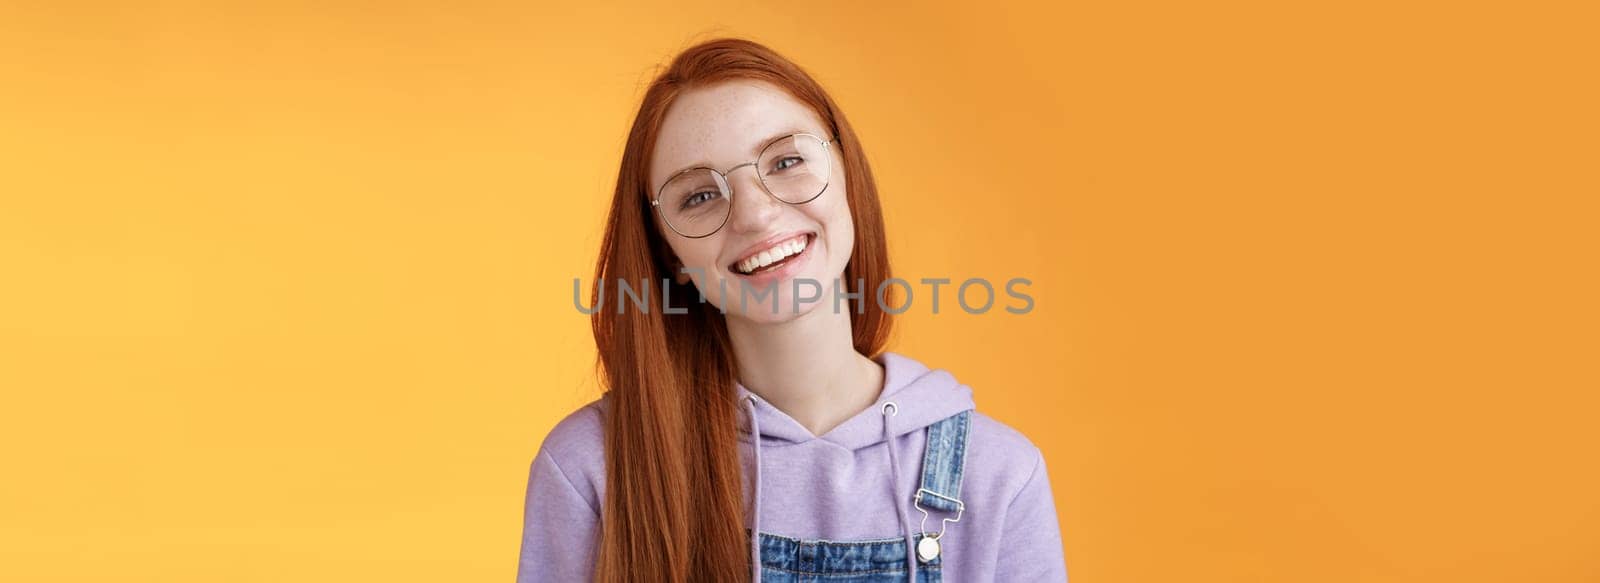 Wellbeing, lifestyle, people concept. Attractive friendly-looking smiling redhead young girl straight long natural ginger hair wearing glasses laughing happily enjoy nice relaxing cafe atmosphere.